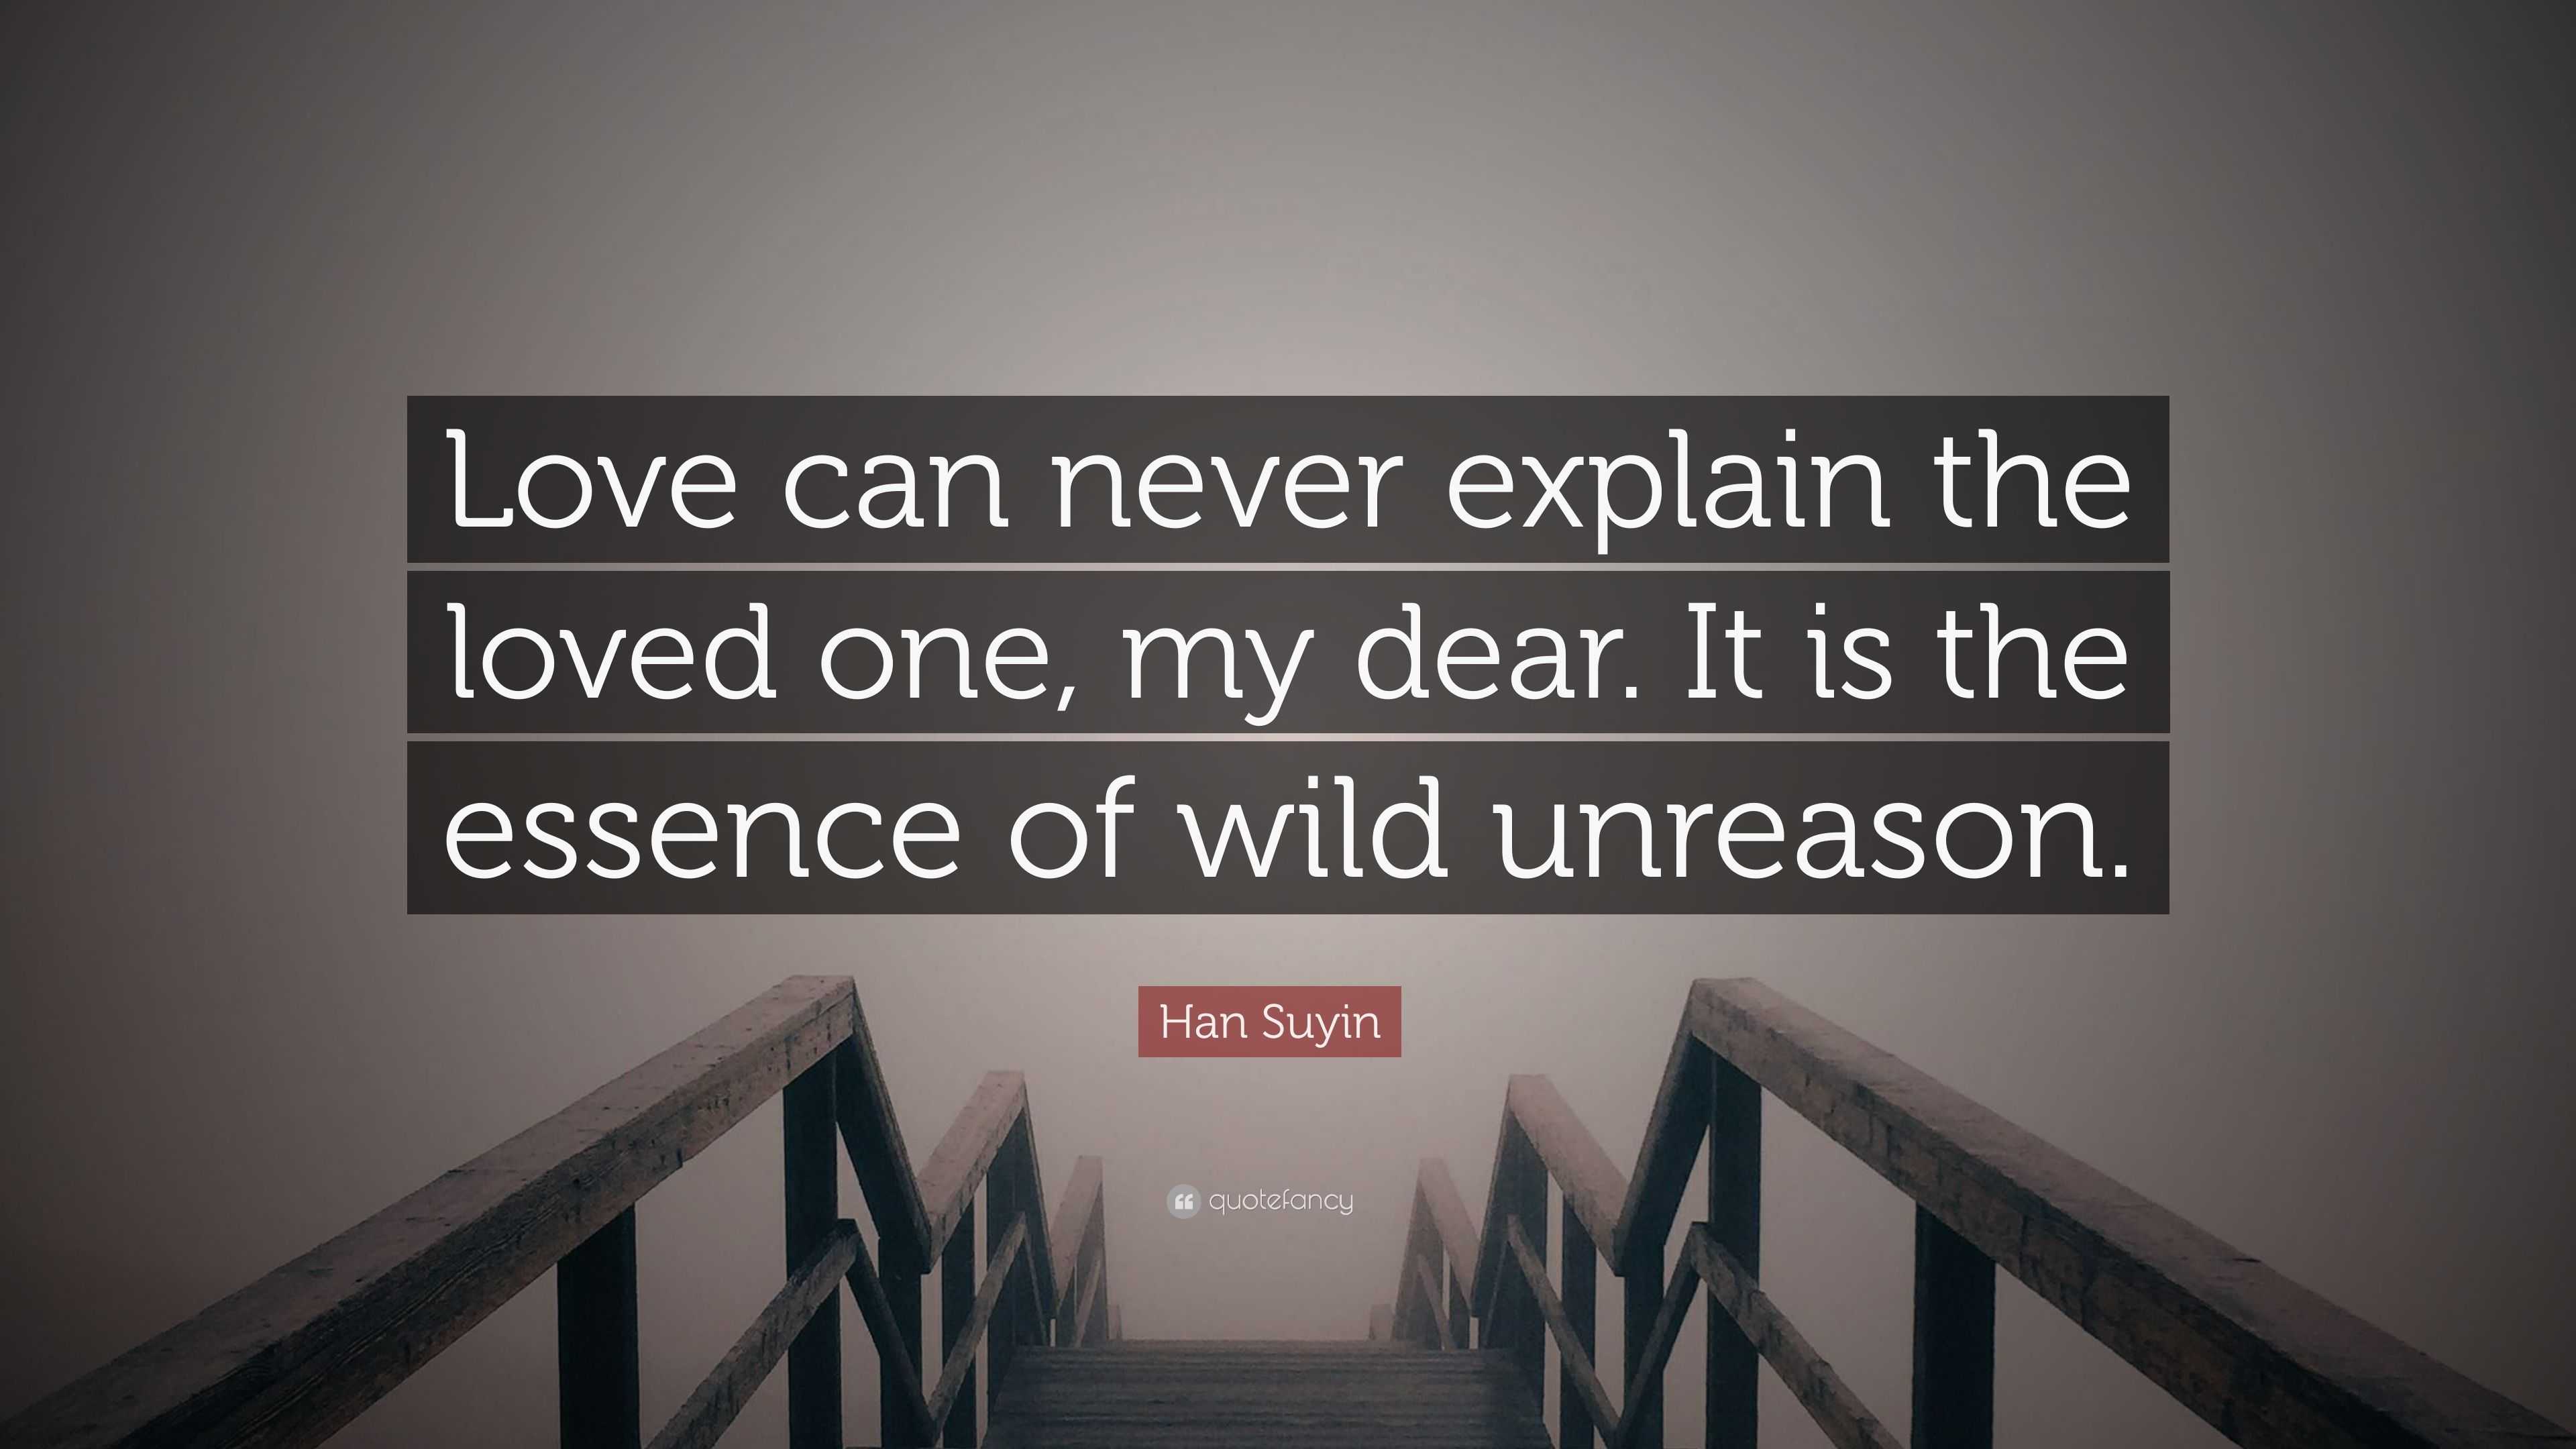 Han Suyin Quote “Love can never explain the loved one my dear